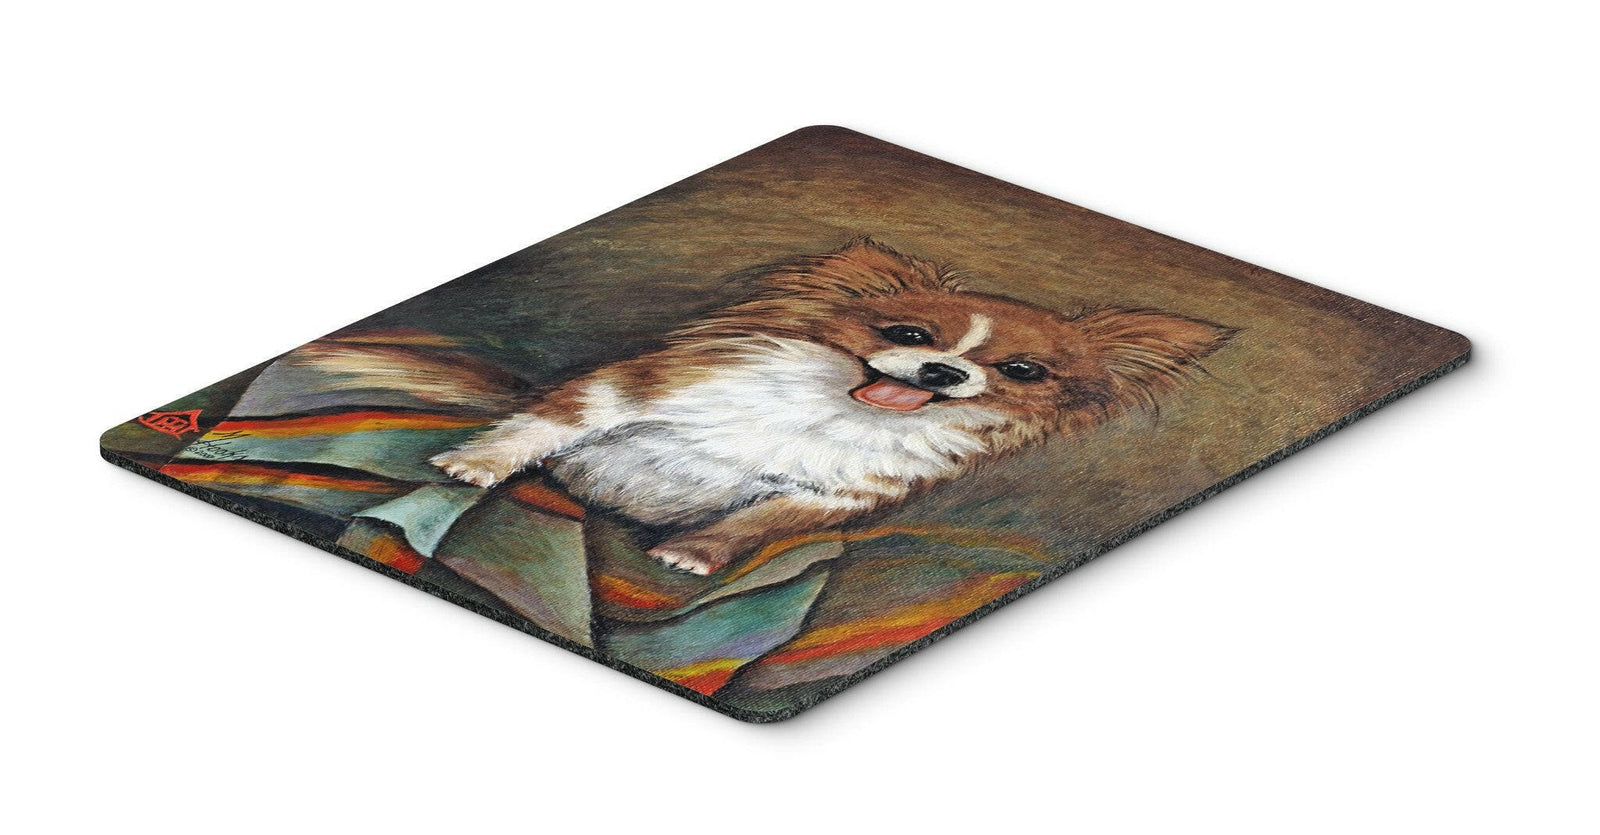 Cecilia Chihuahua Long Hair  Mouse Pad, Hot Pad or Trivet MH1039MP by Caroline's Treasures